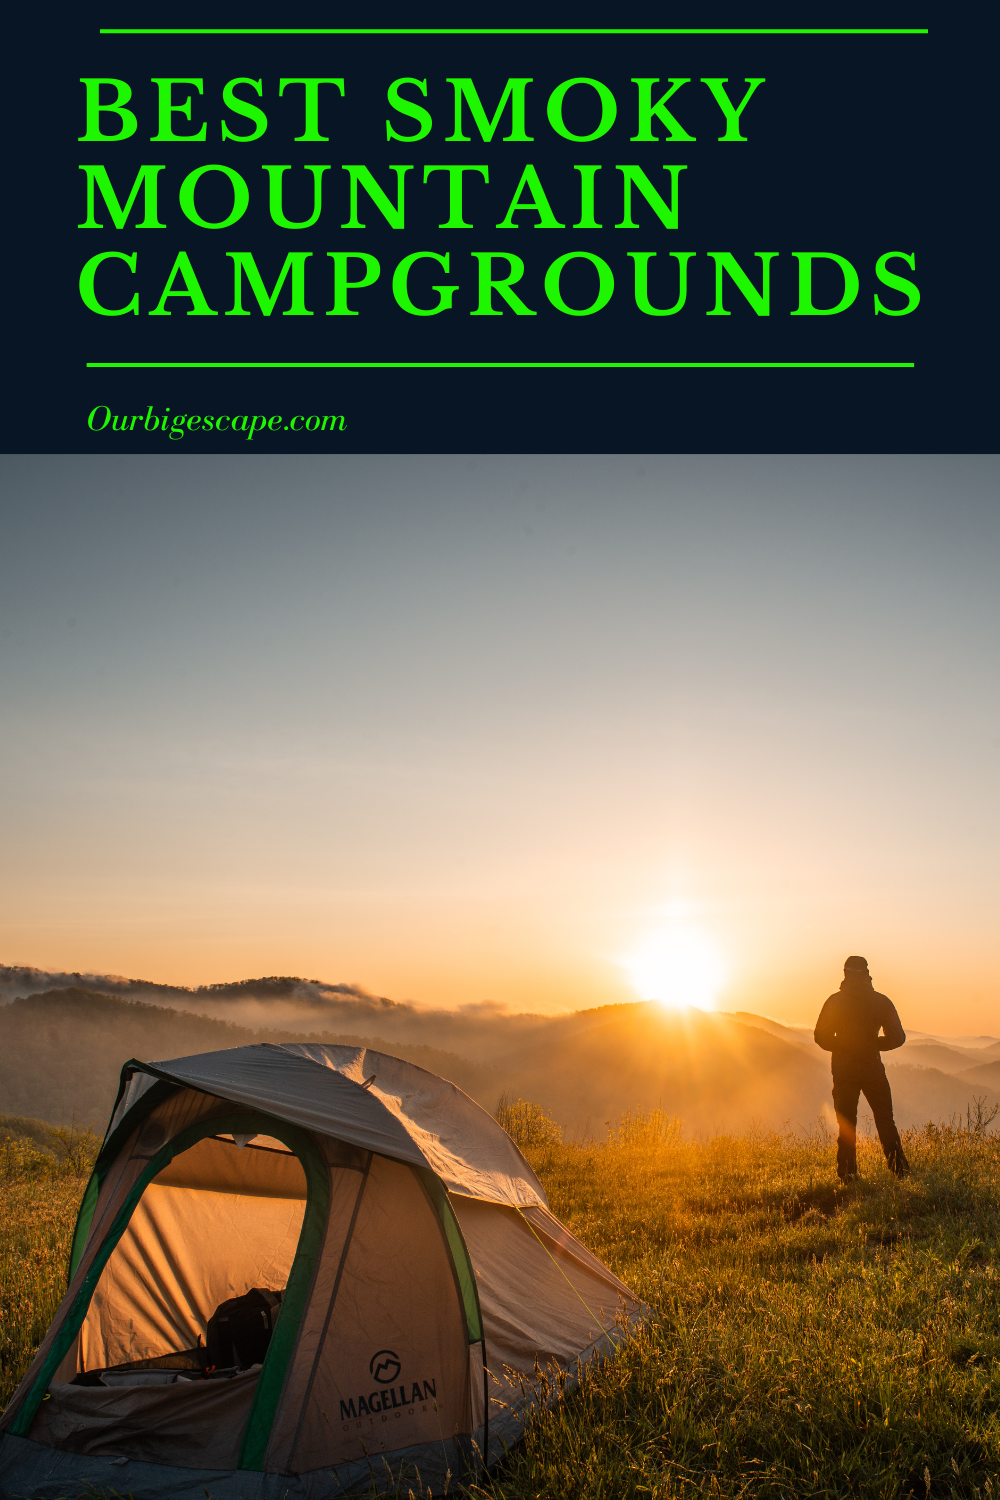 Best Smoky Mountain Campgrounds (2)